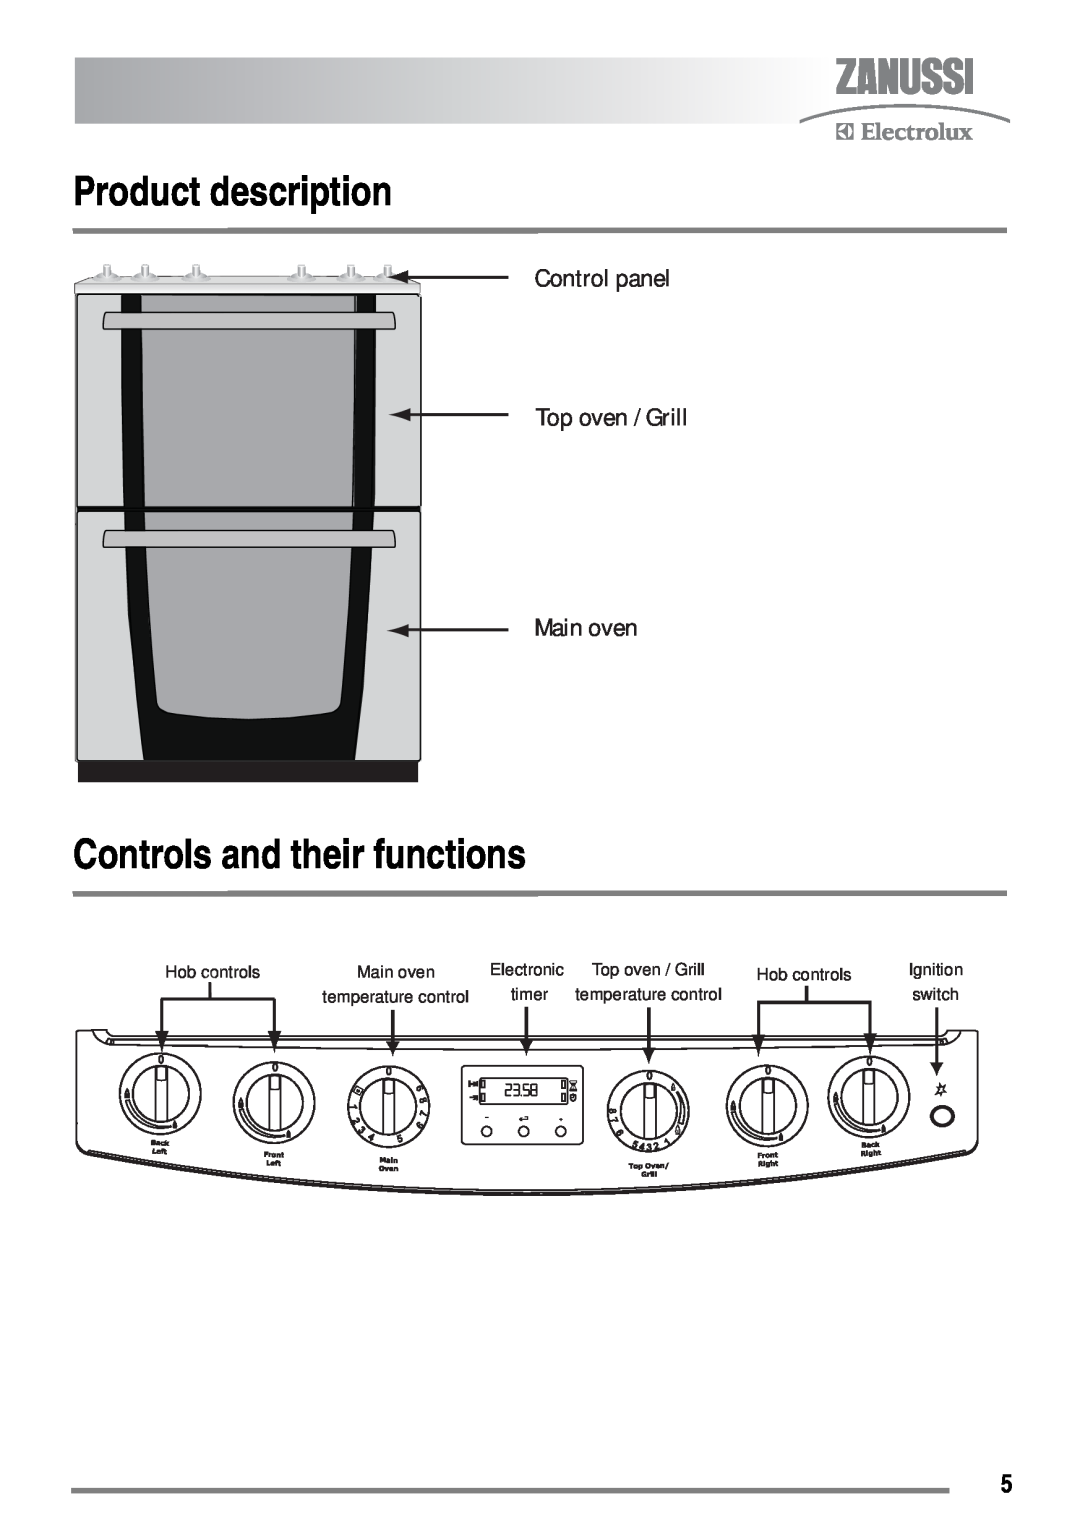 Zanussi ZKG6040 Product description, Controls and their functions, Control panel Top oven / Grill Main oven, timer, switch 